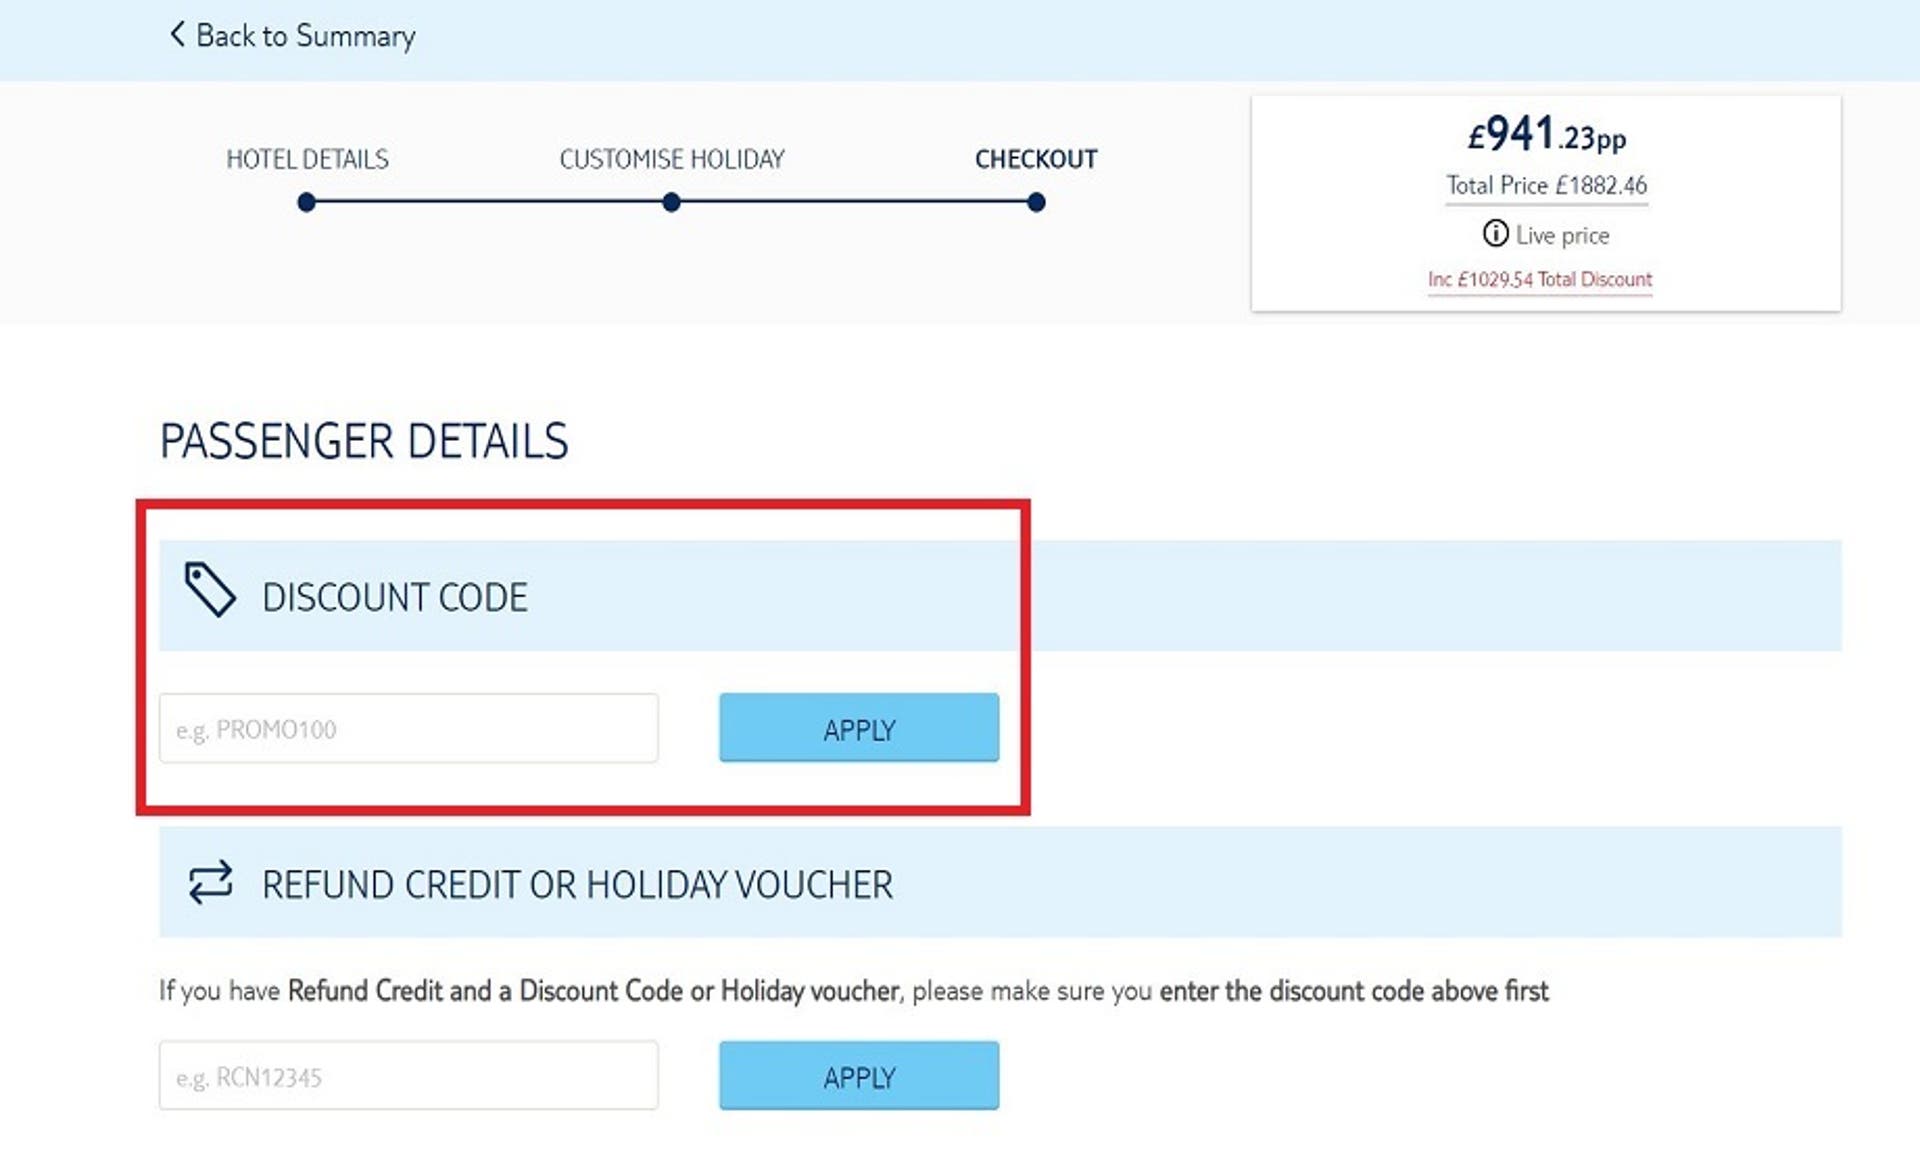  A screenshot of the TUI website showing users how to use their discount code with the 'Discount Code' box and 'Apply' button highlighted. 